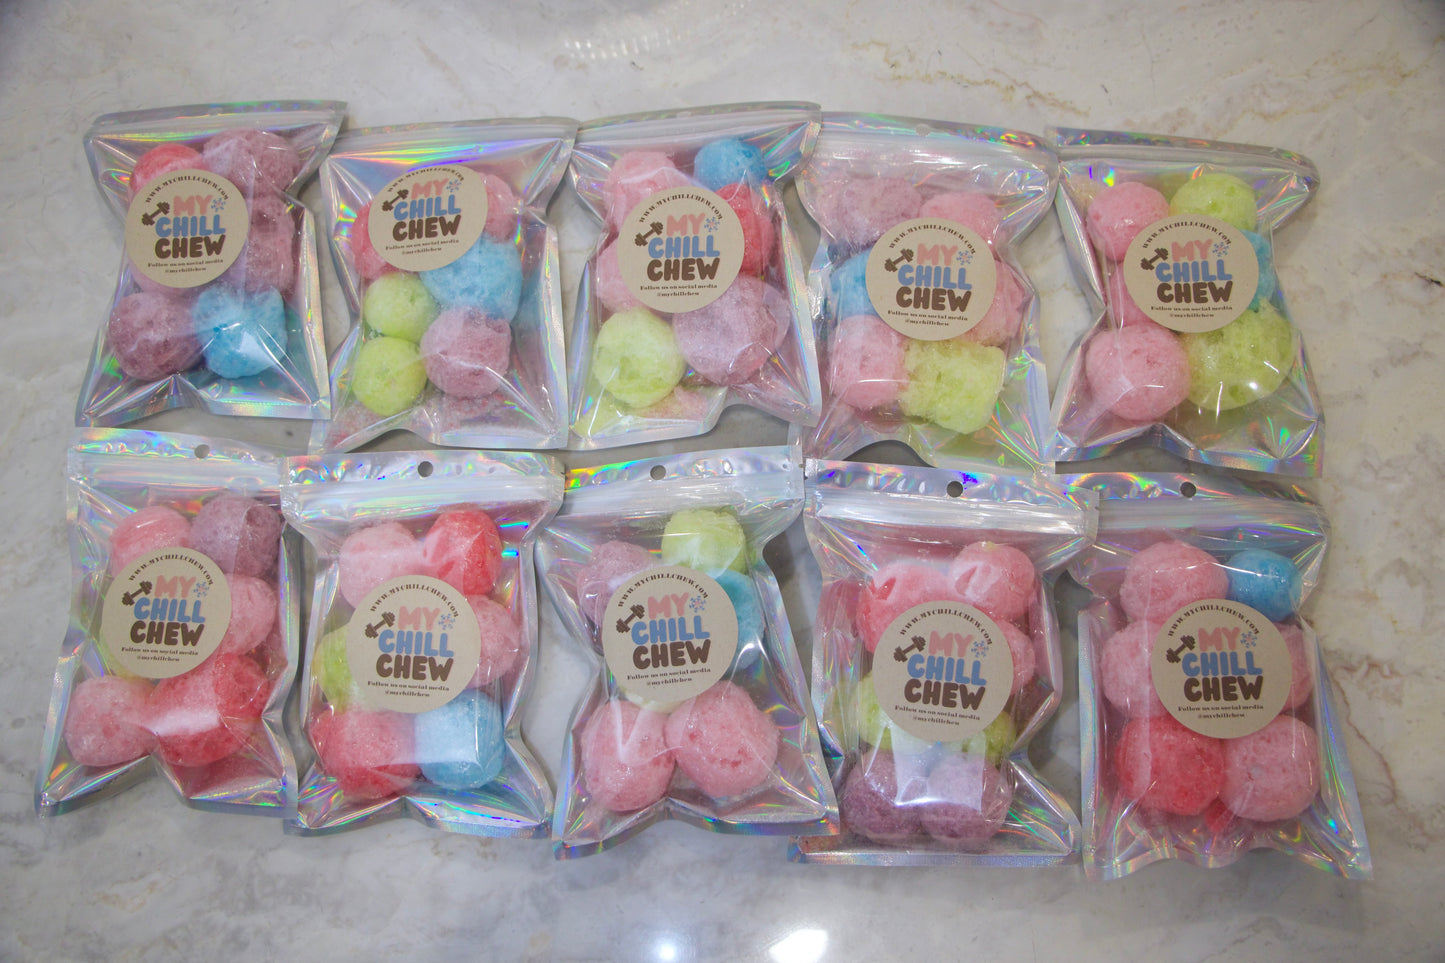 10 Jolly Chew Bags @ (40g/bag) - Shipping included